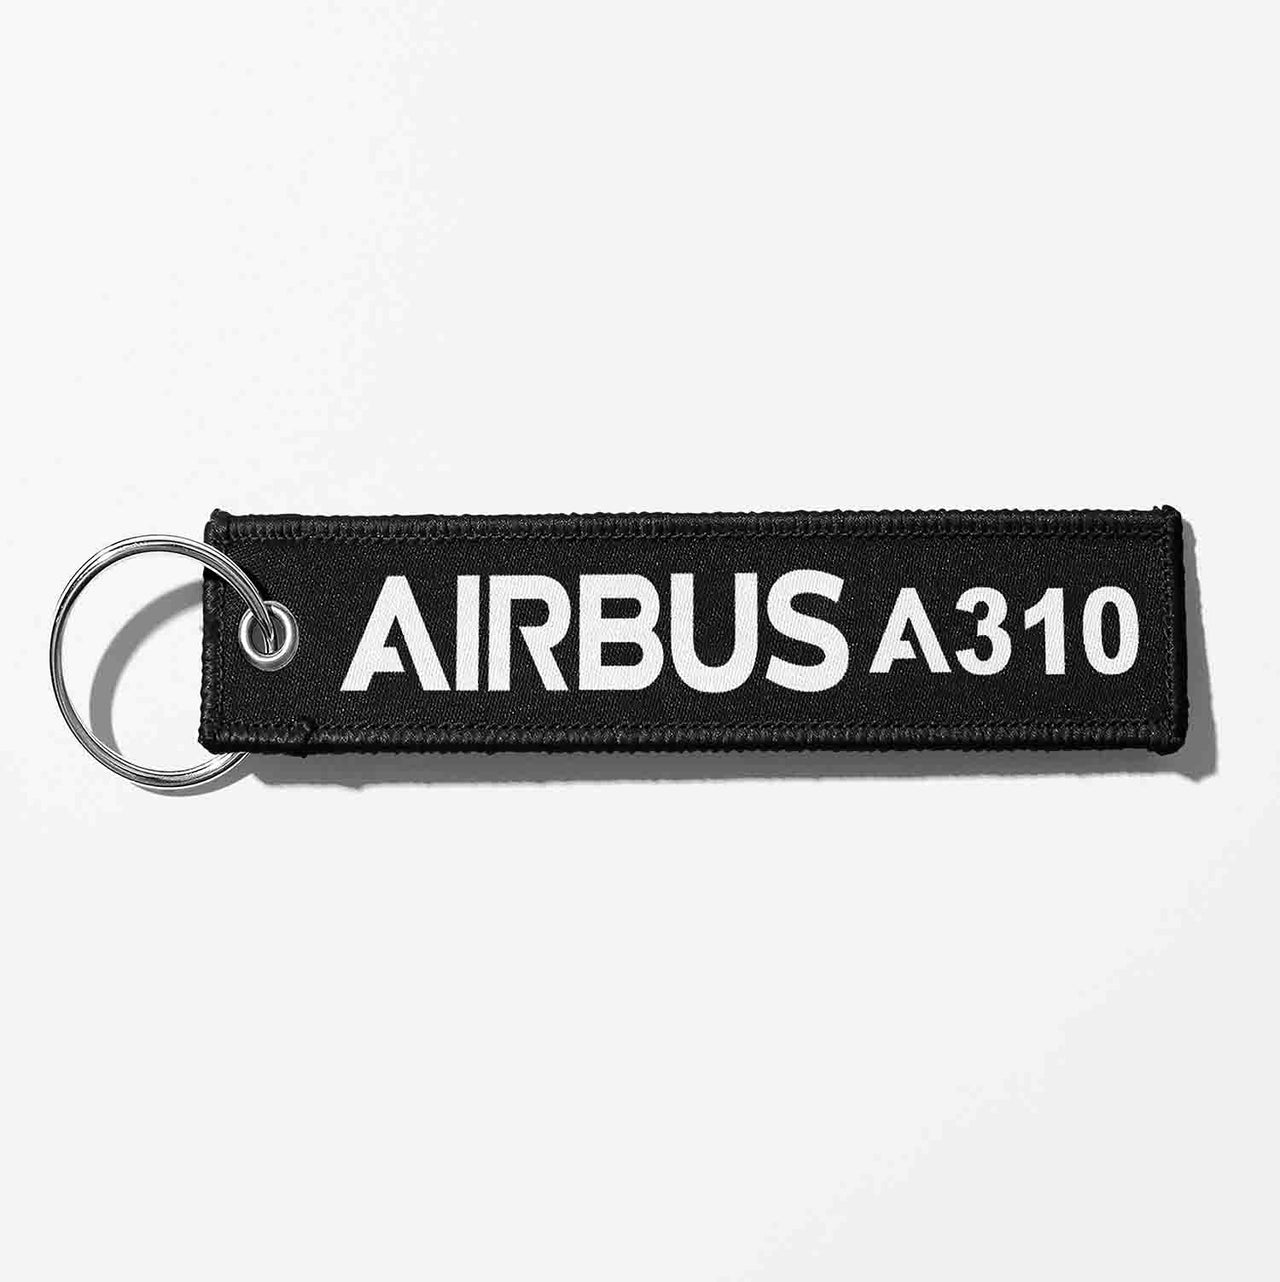 Airbus A310 & Text Designed Key Chains